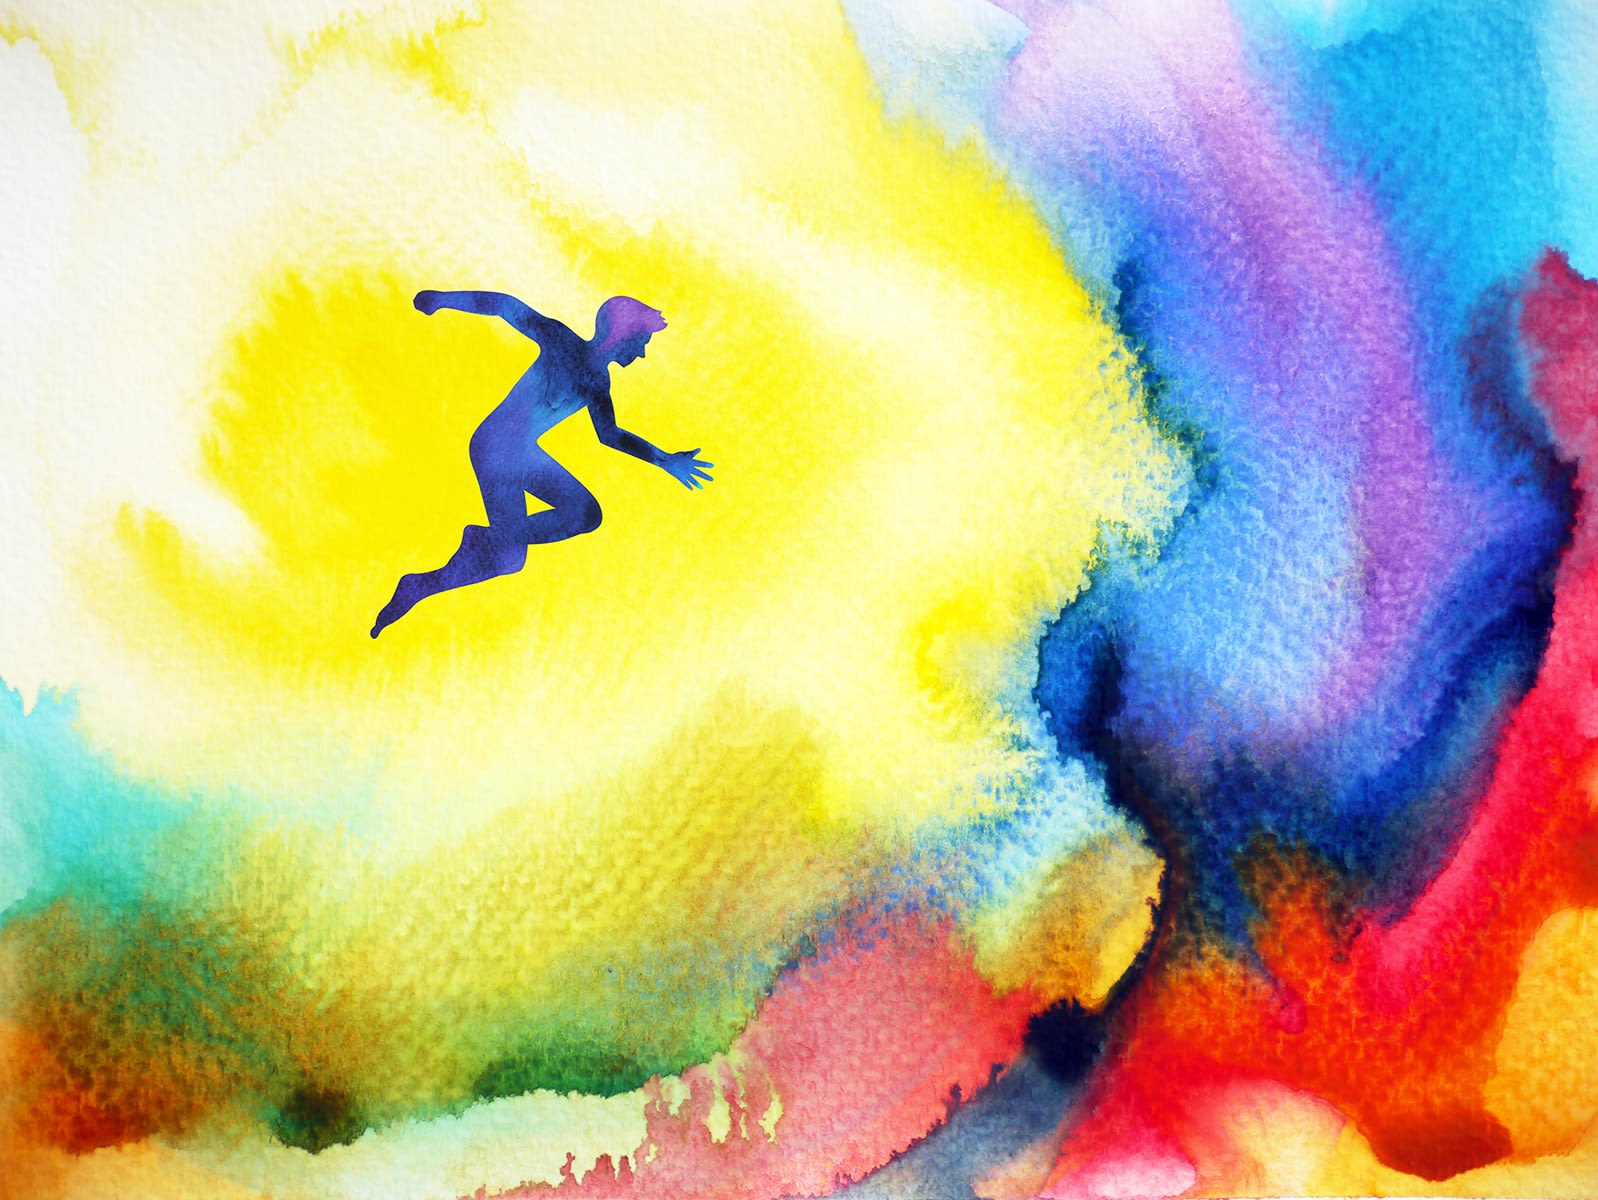 watercolour abstract image of leaping man